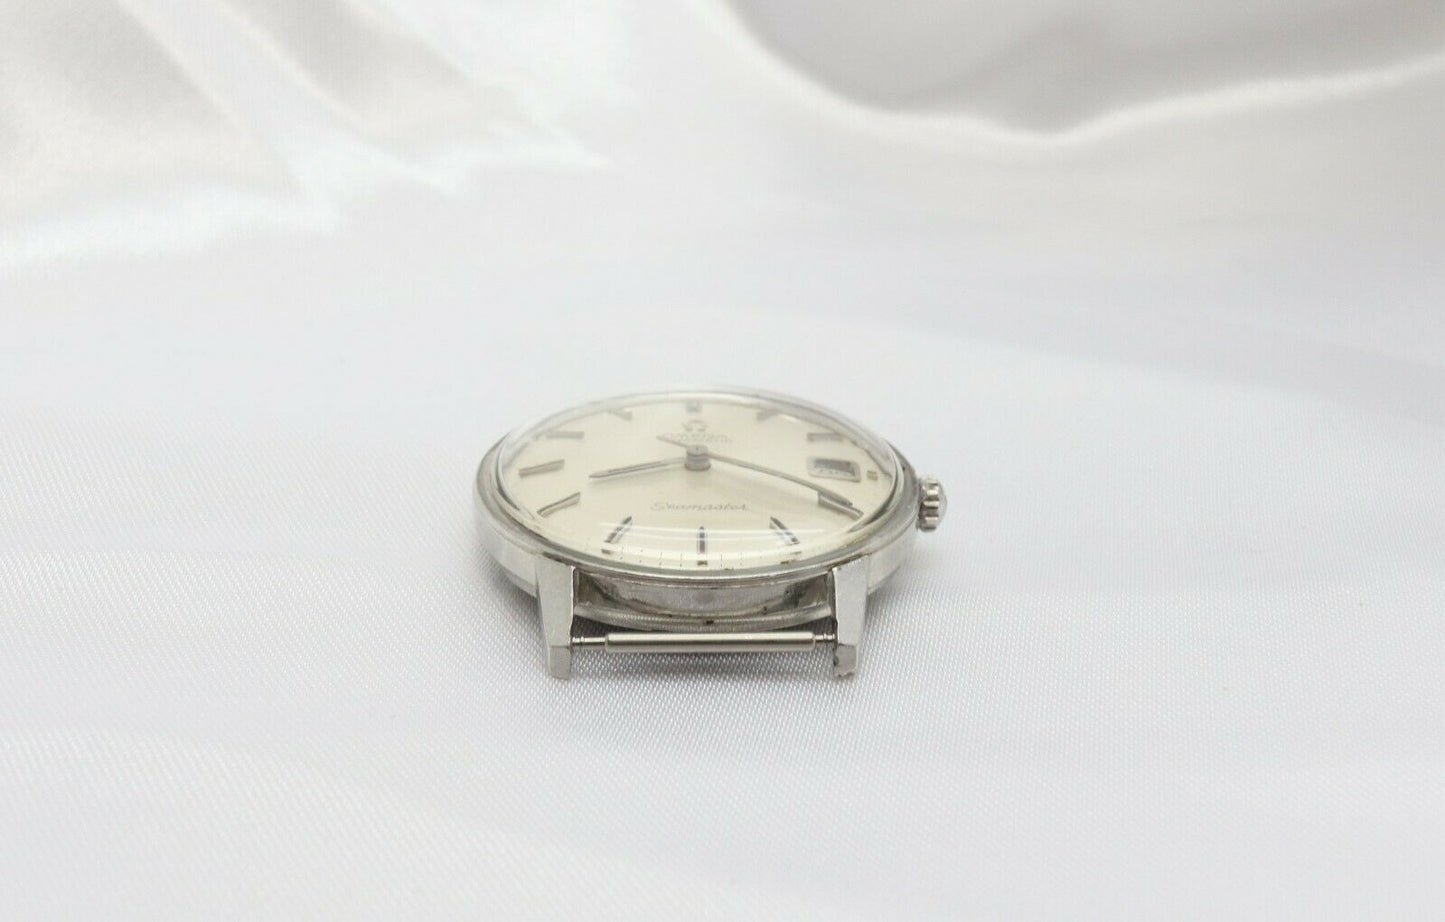 Vintage Omega Seamaster 34mm Watch Circa 1960s with 562 Movement, Automatic, Date